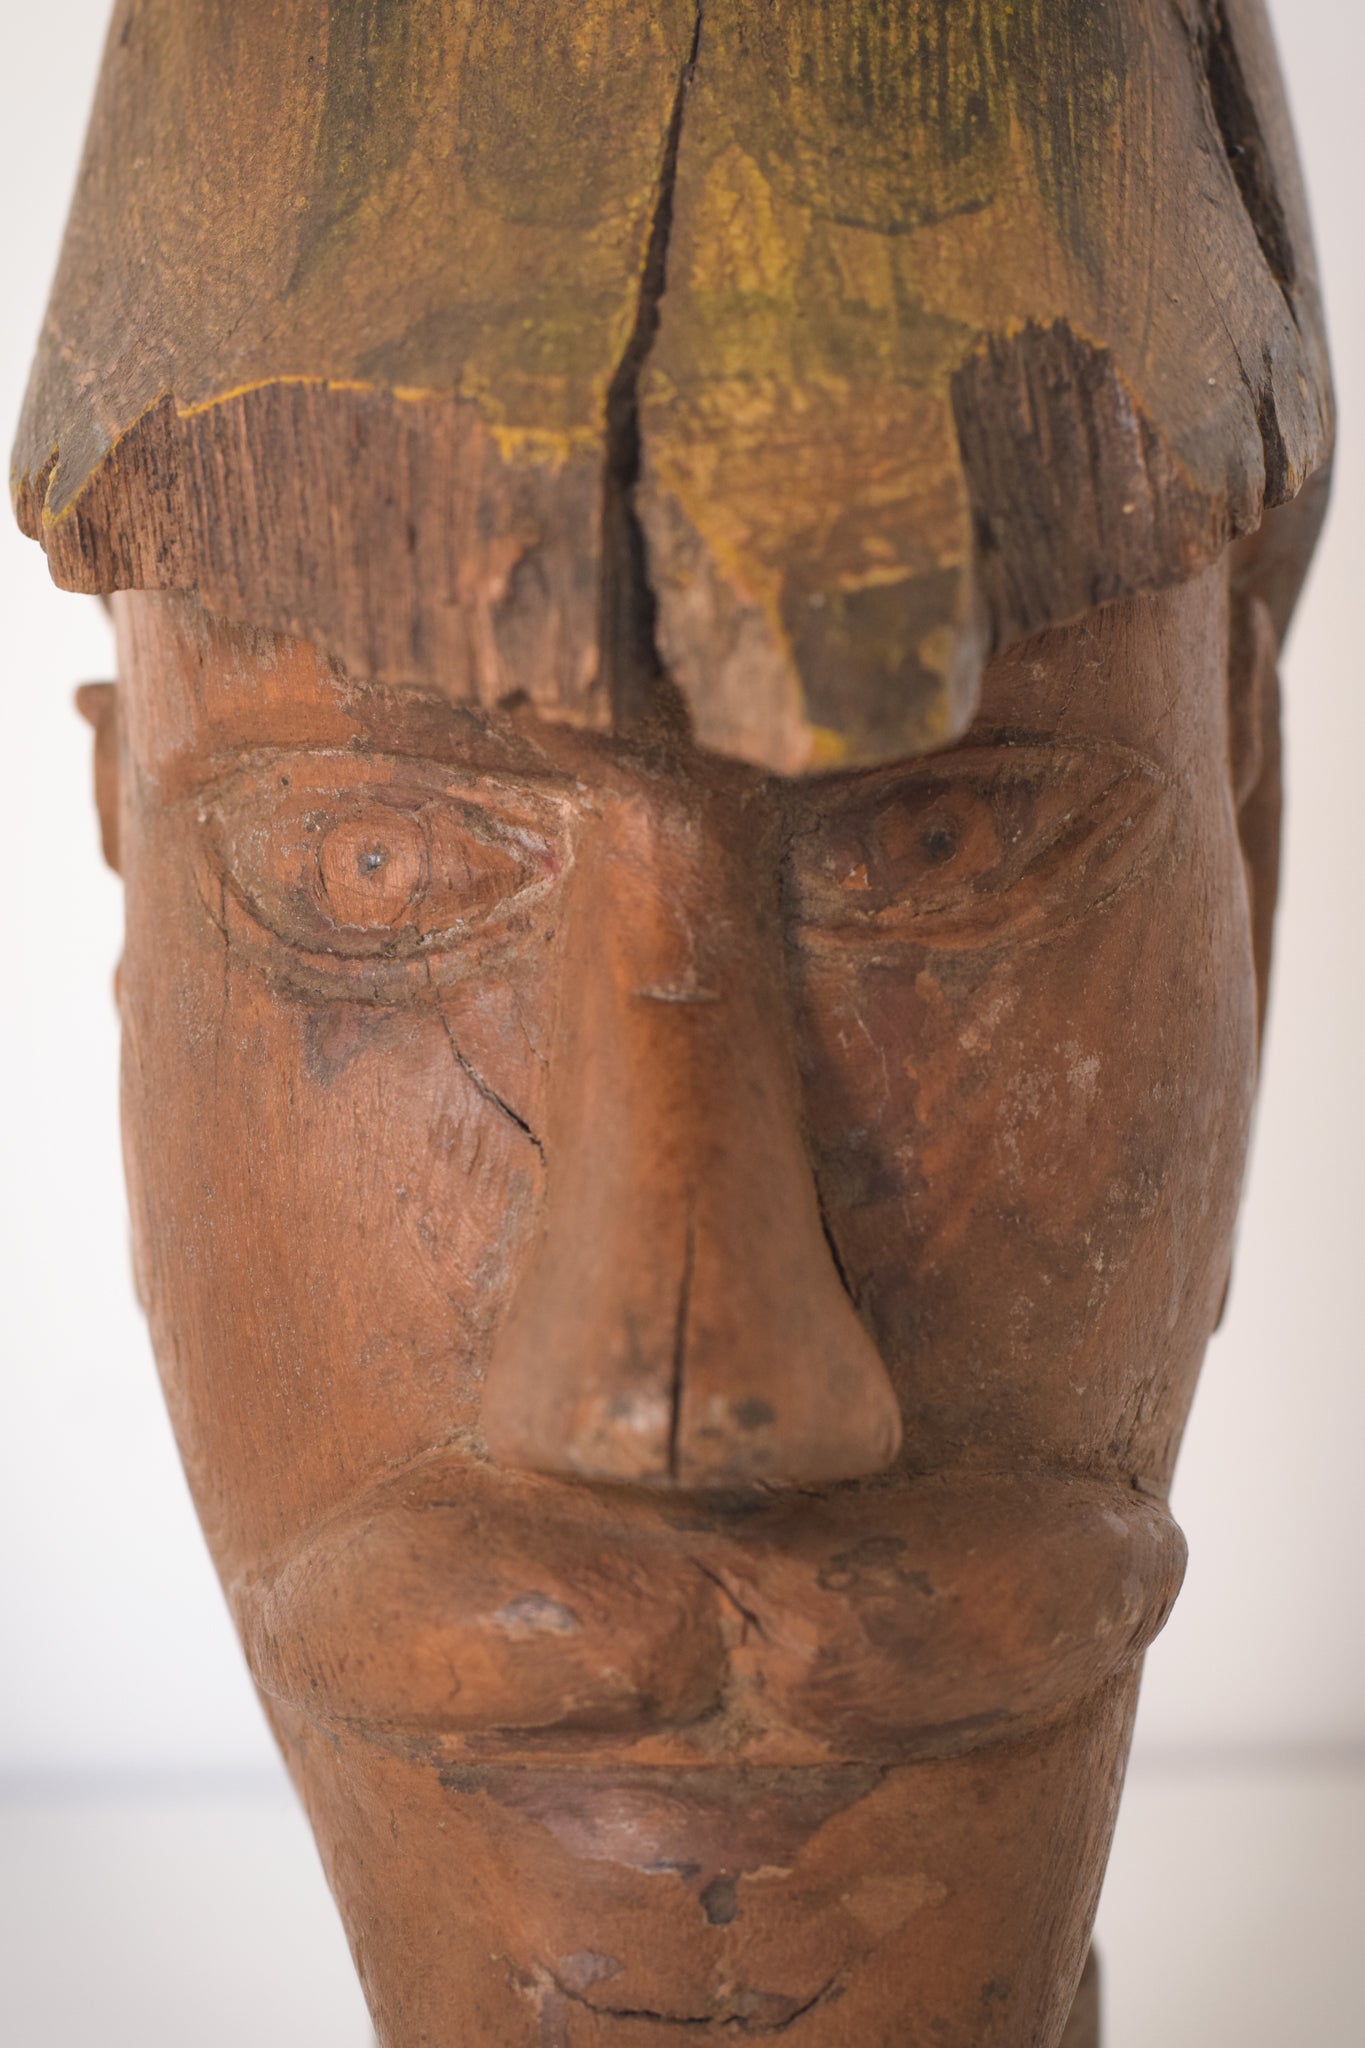 Hand-carved Wooden Head of a Soldier